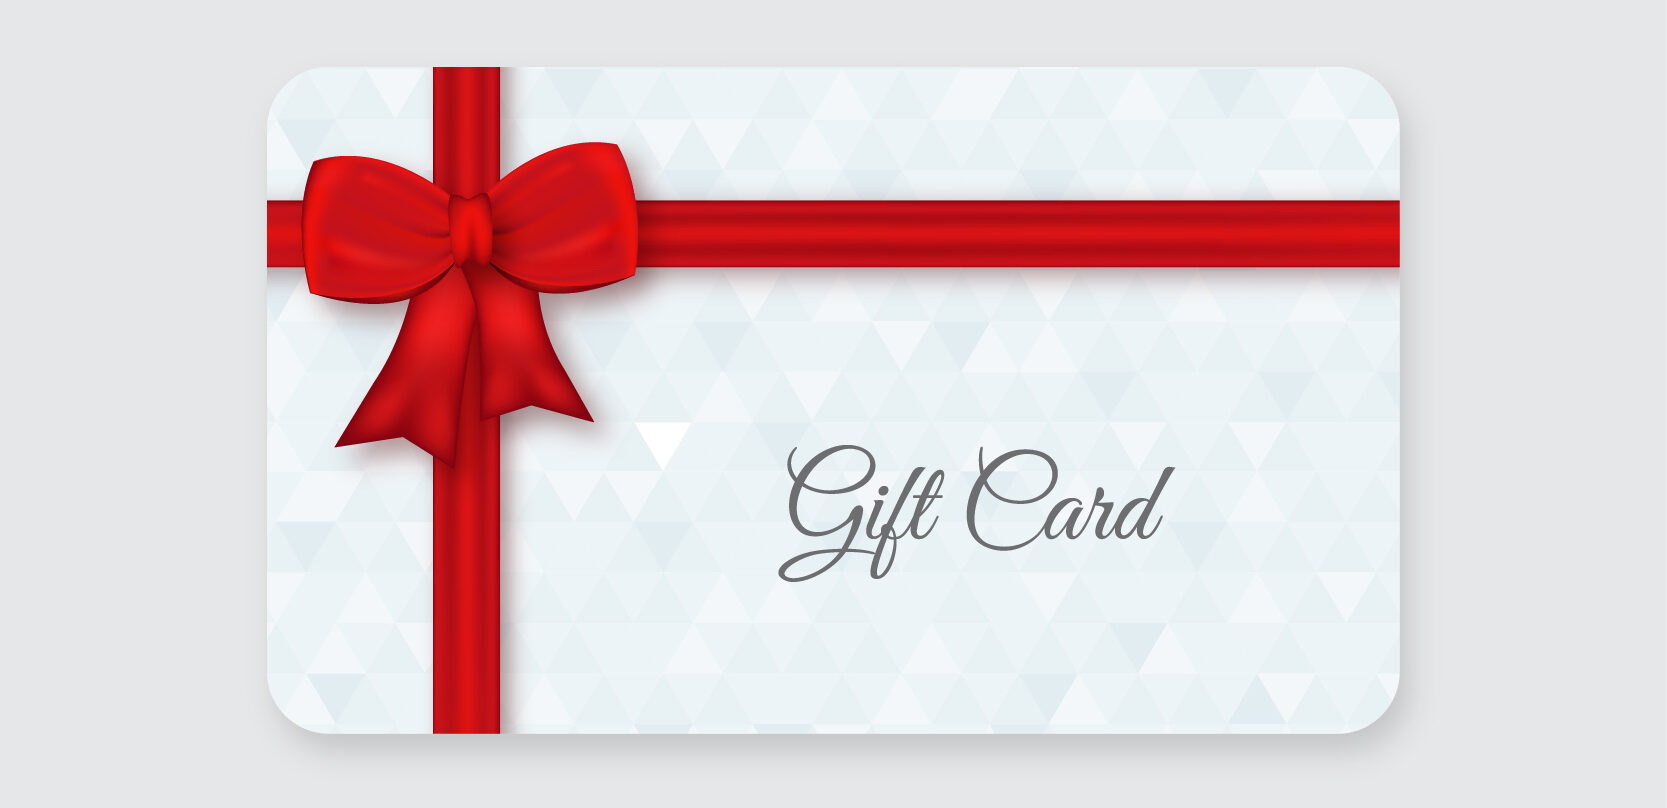 11 Best Gift Cards: Top Picks and Where to Find Them